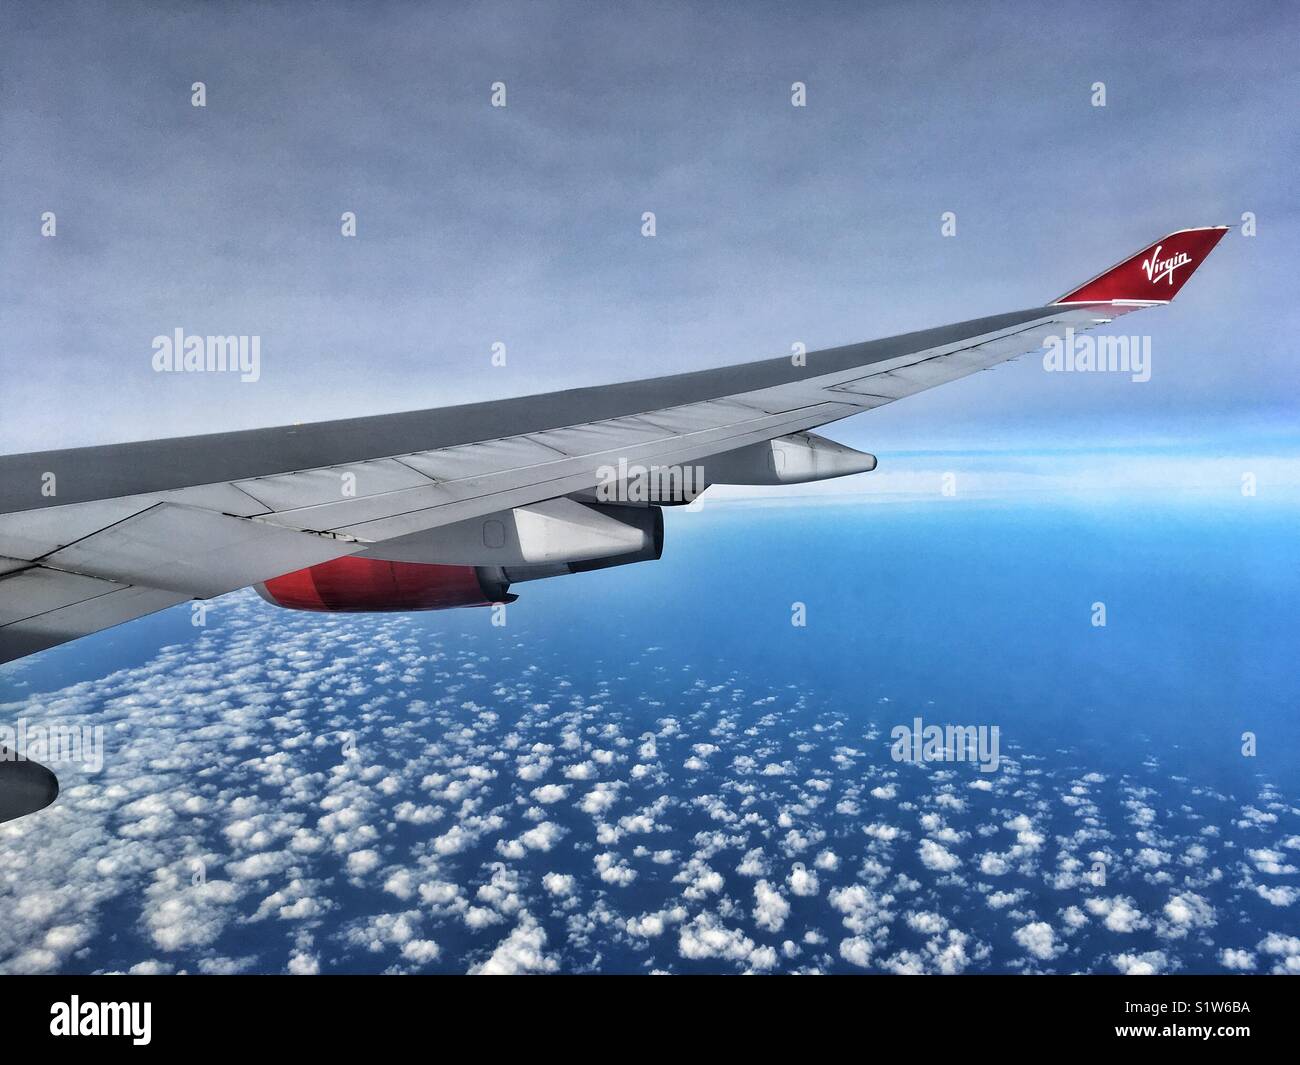 View out over the wing of a Virgin Atlantic airliner Stock Photo